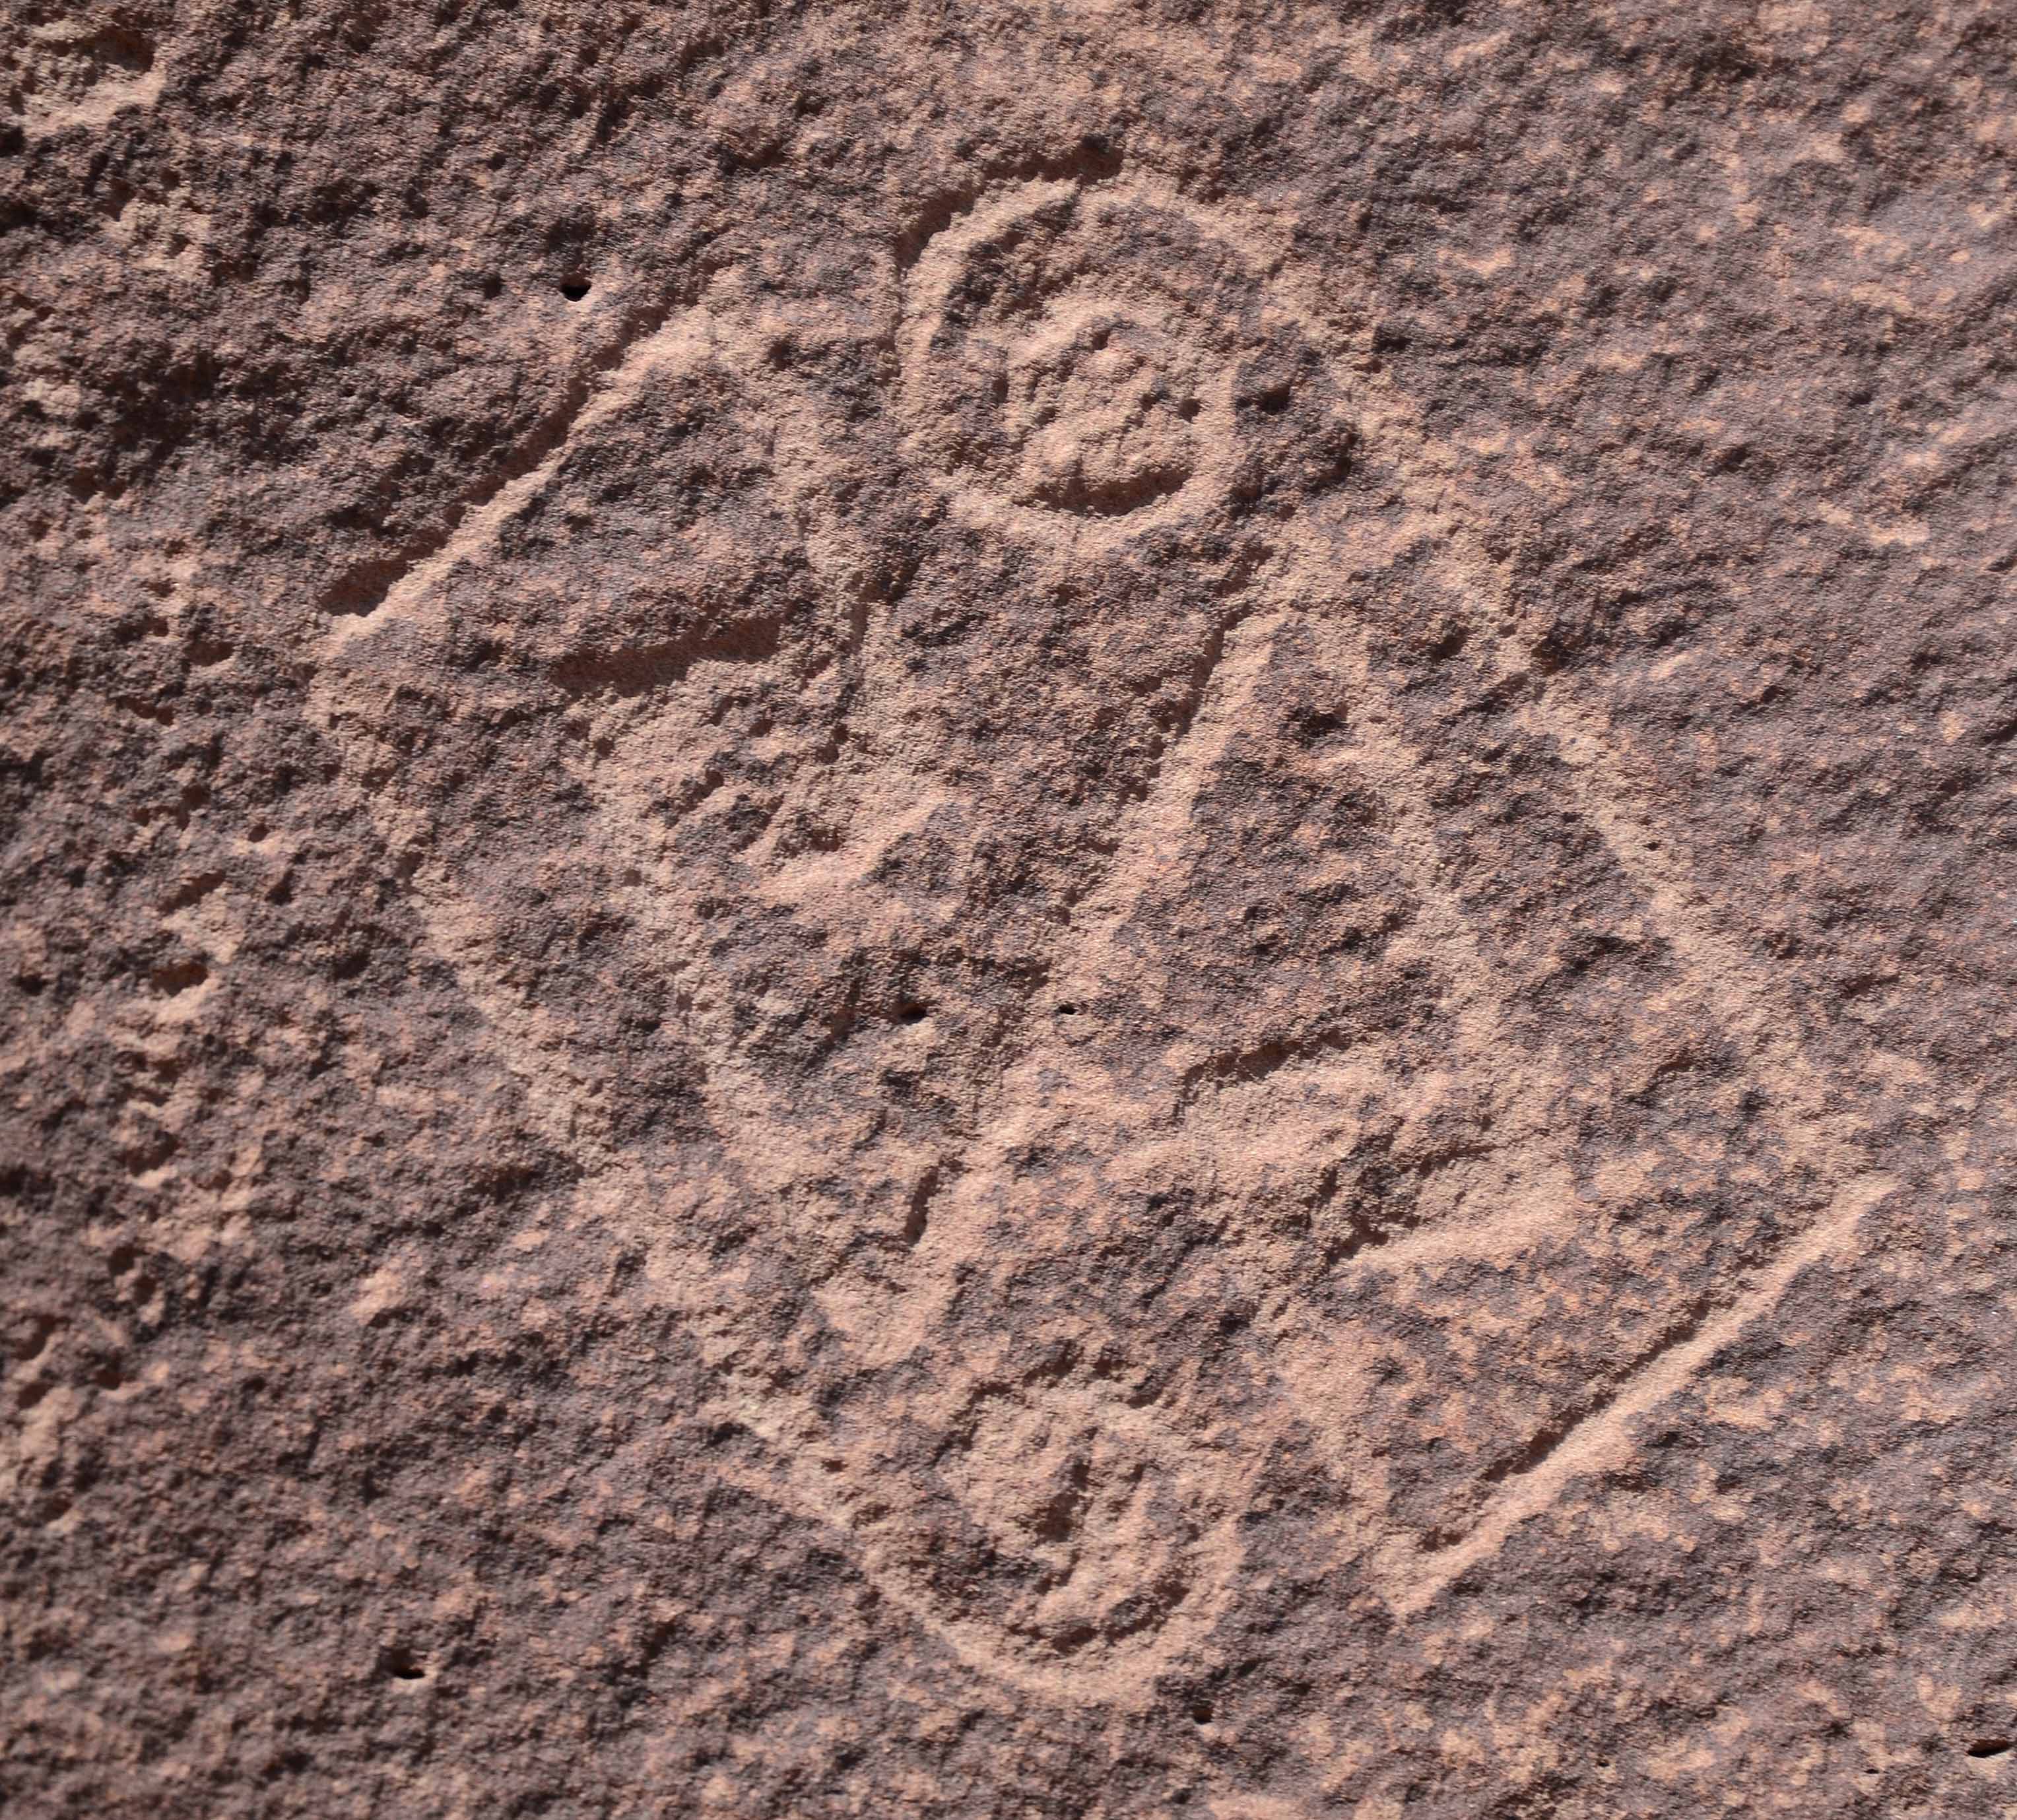 Petroglyphs are proof of a vast sea of archaeological sites in Arizona available for protection and development